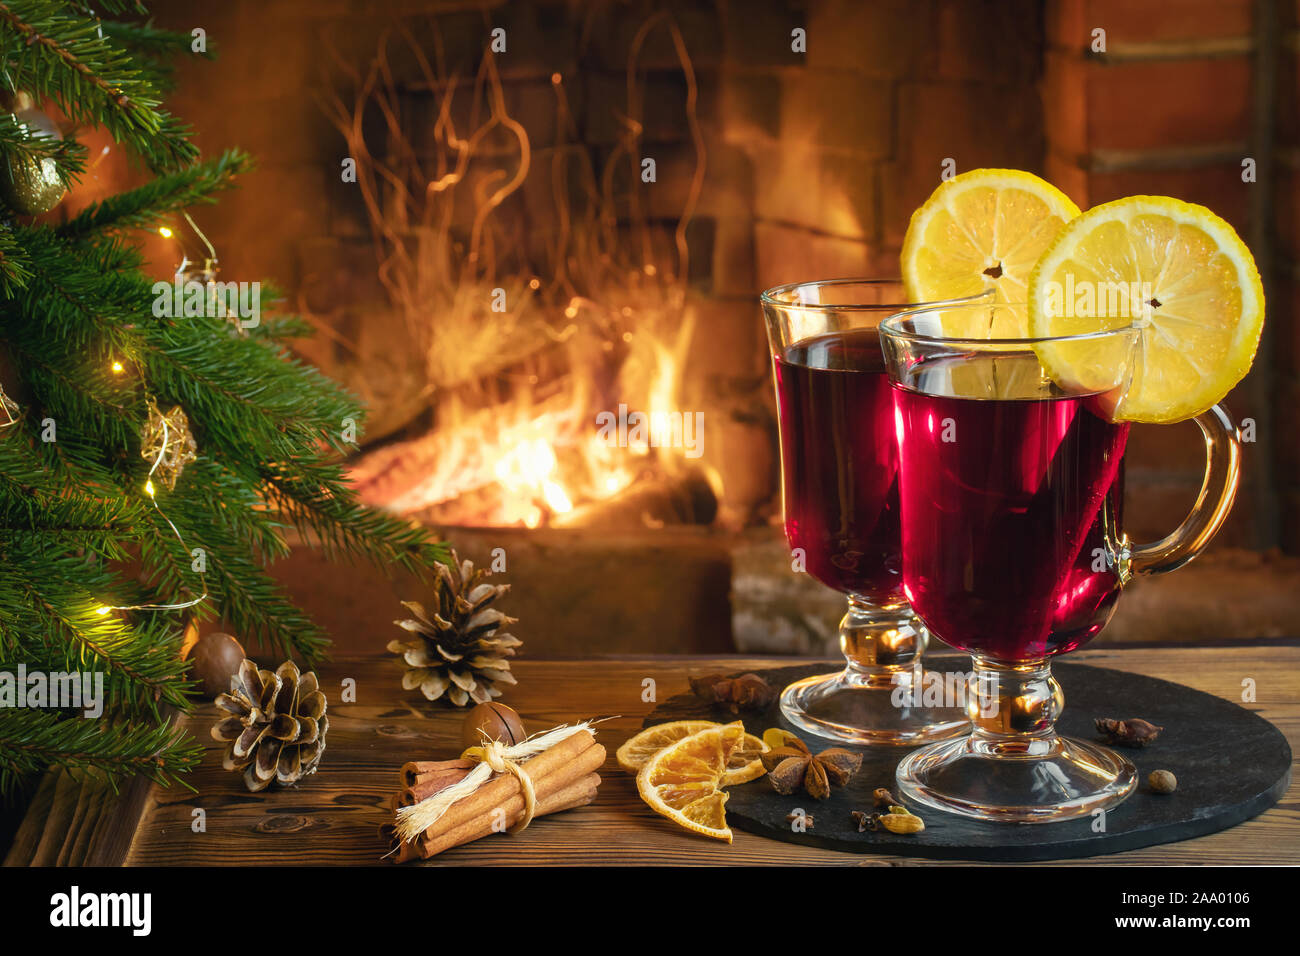 Christmas composition - two glasses with mulled wine on a wooden table near  a Christmas tree opposite a burning fireplace Stock Photo - Alamy